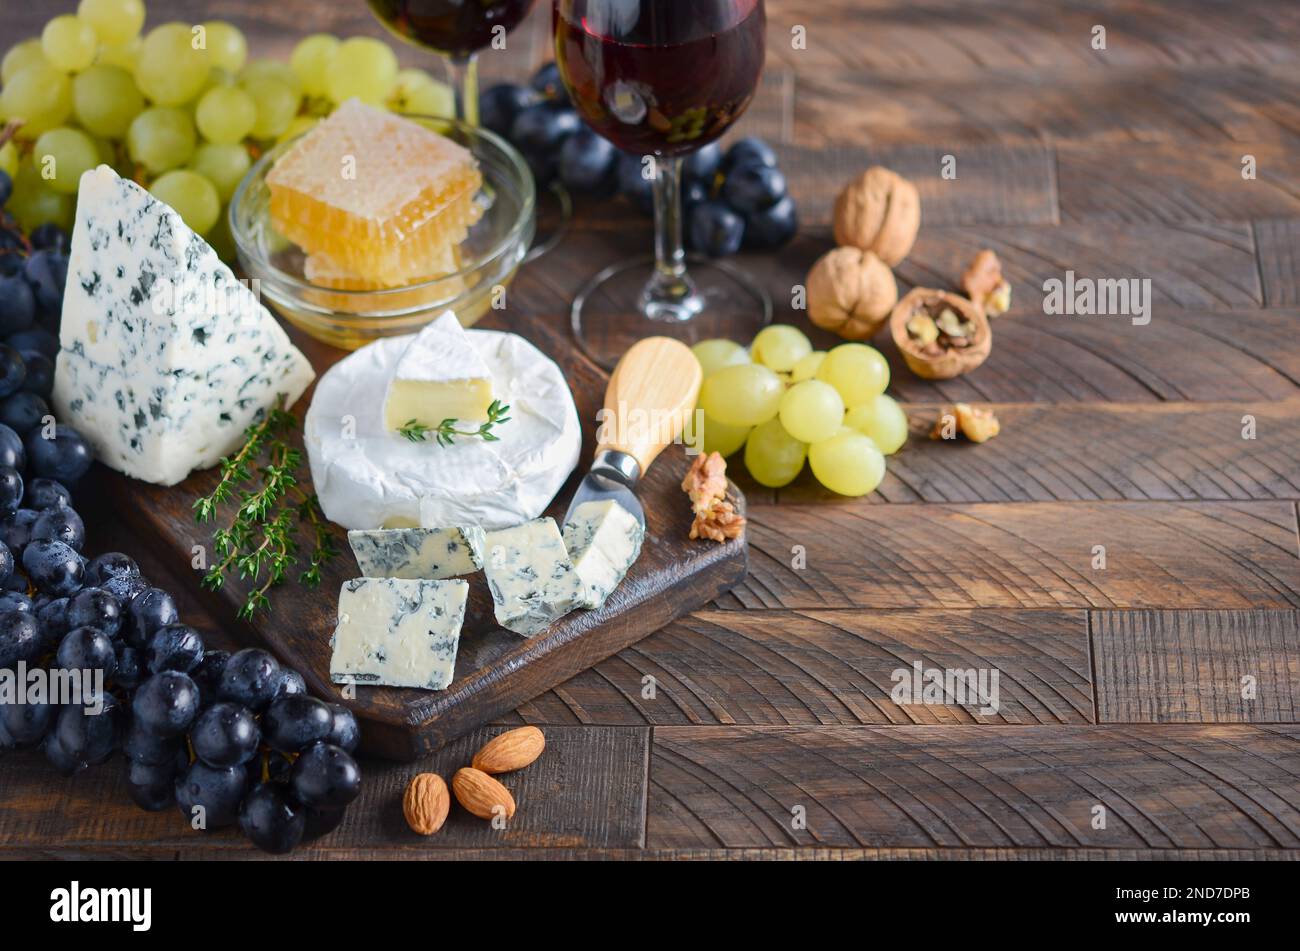 Cheese plate with grapes, honey, nuts and red wine on a wooden table. Stock Photo